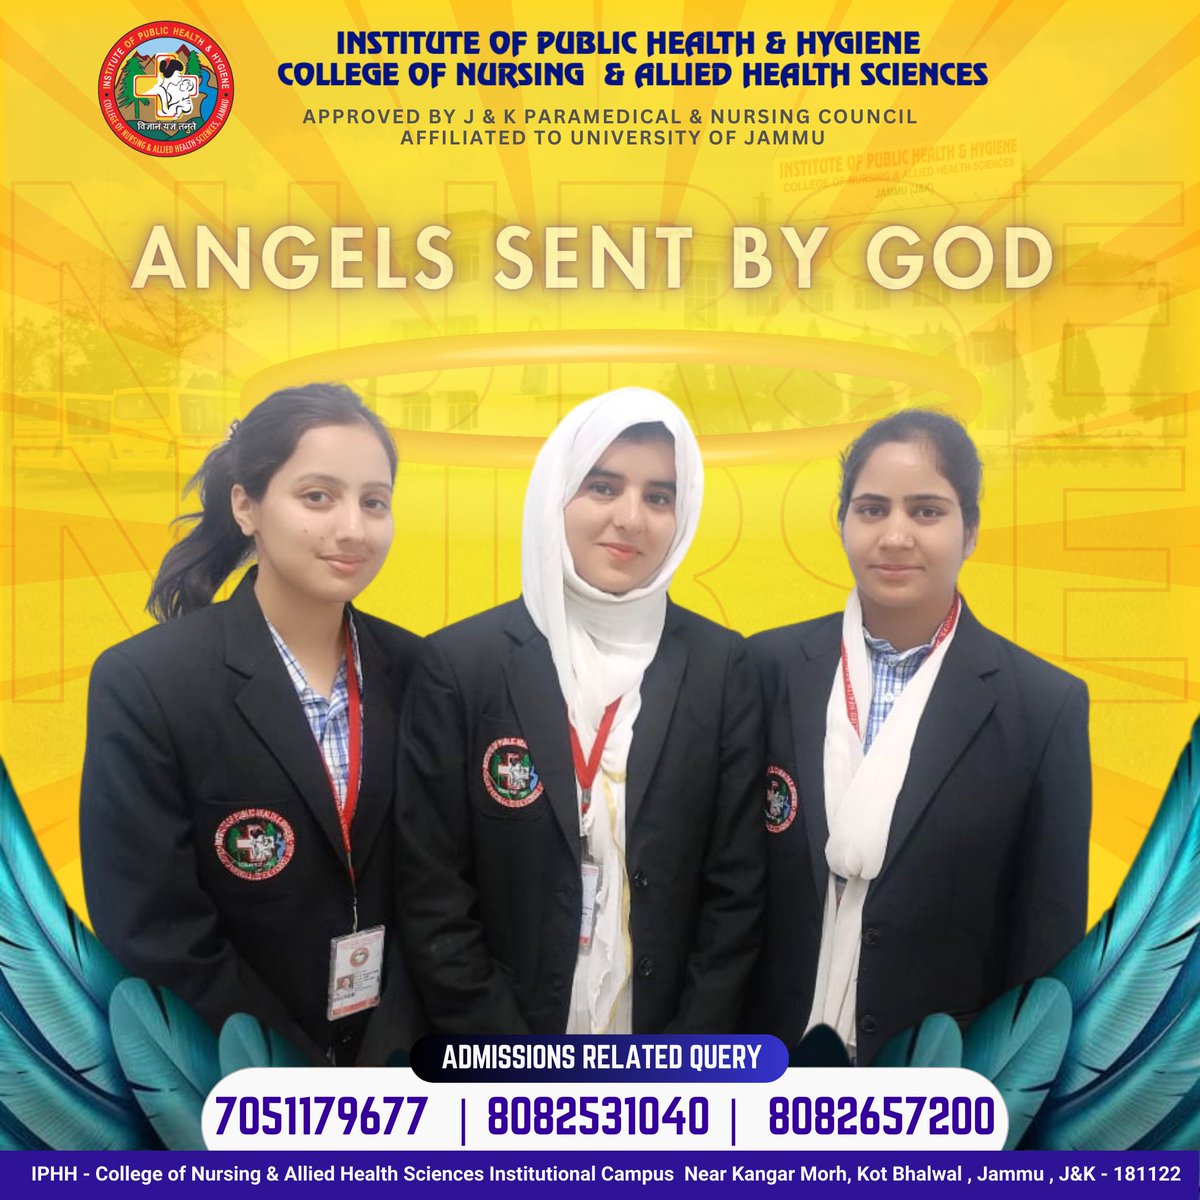 ADMISSION OPEN |NURSES ARE ANGELS SENT BY GOD ! HURRY! JOIN THE NOBLE PROFESSION TODAY.
📞 Reach out to our admission experts at:
📲 7051179677
📲 8082531040
📲 8082657200
Enroll now and embark on a rewarding Nursing journey.
#NursingProgram #SuperheroInTraining #IPHHJammu